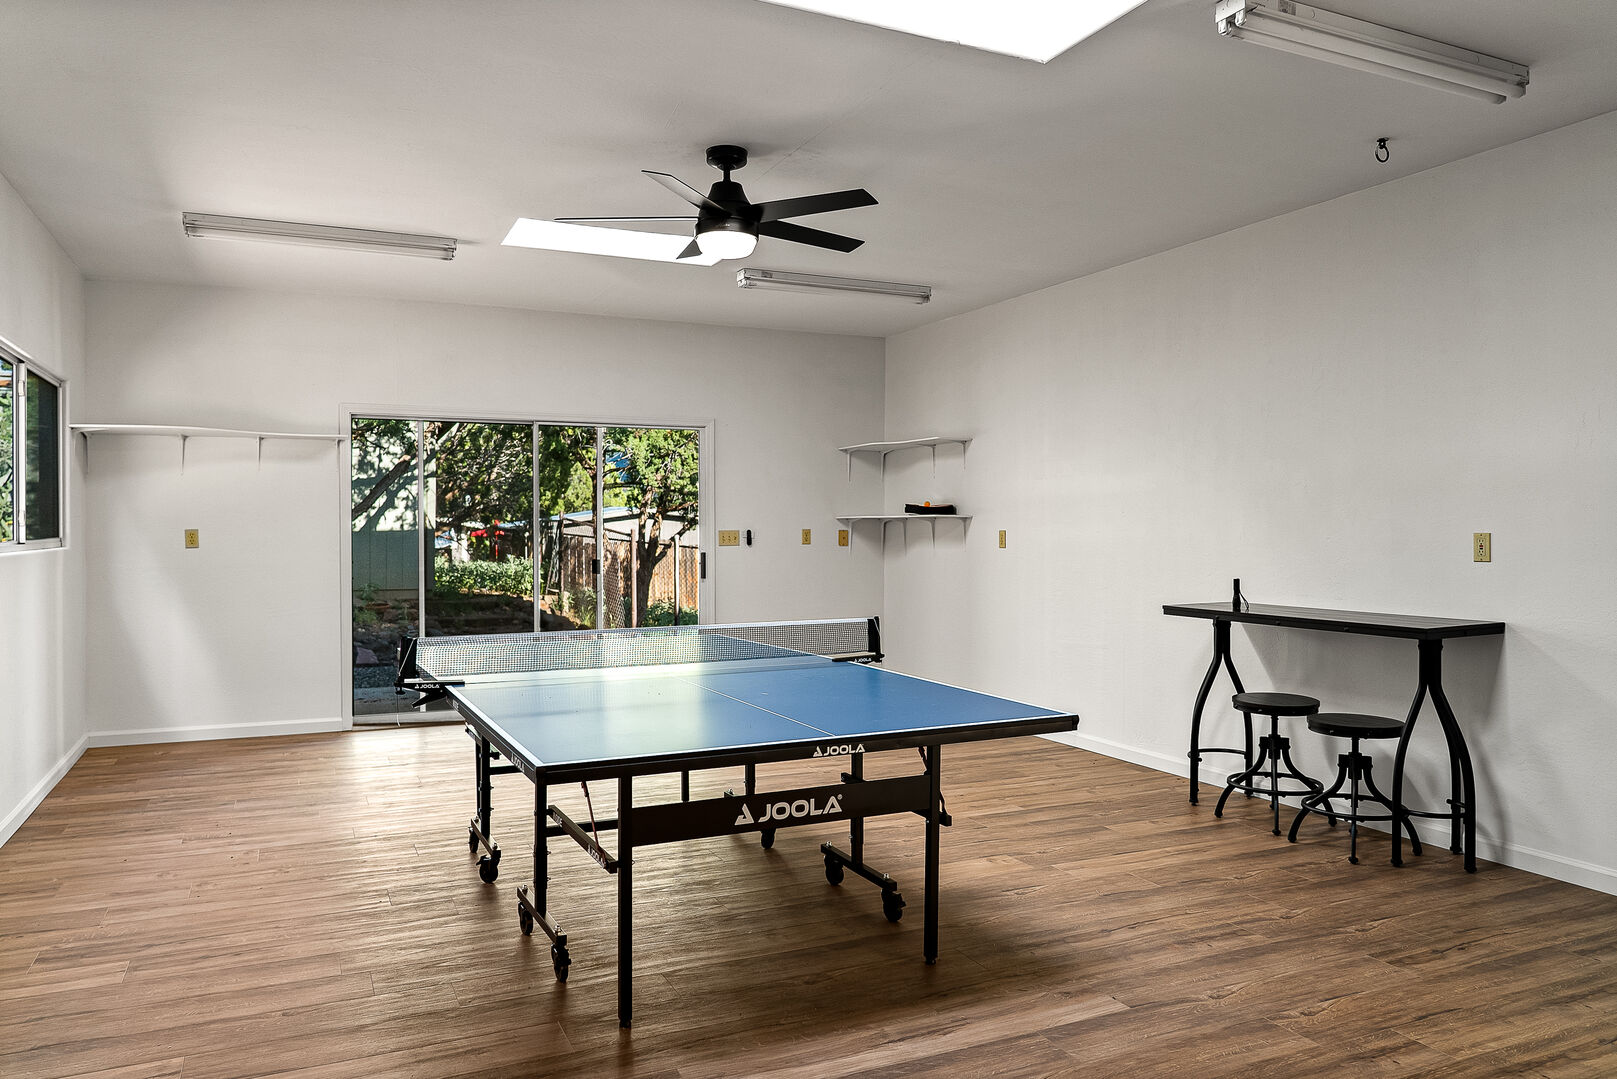 Ping Pong Table in Rec Room off Garage